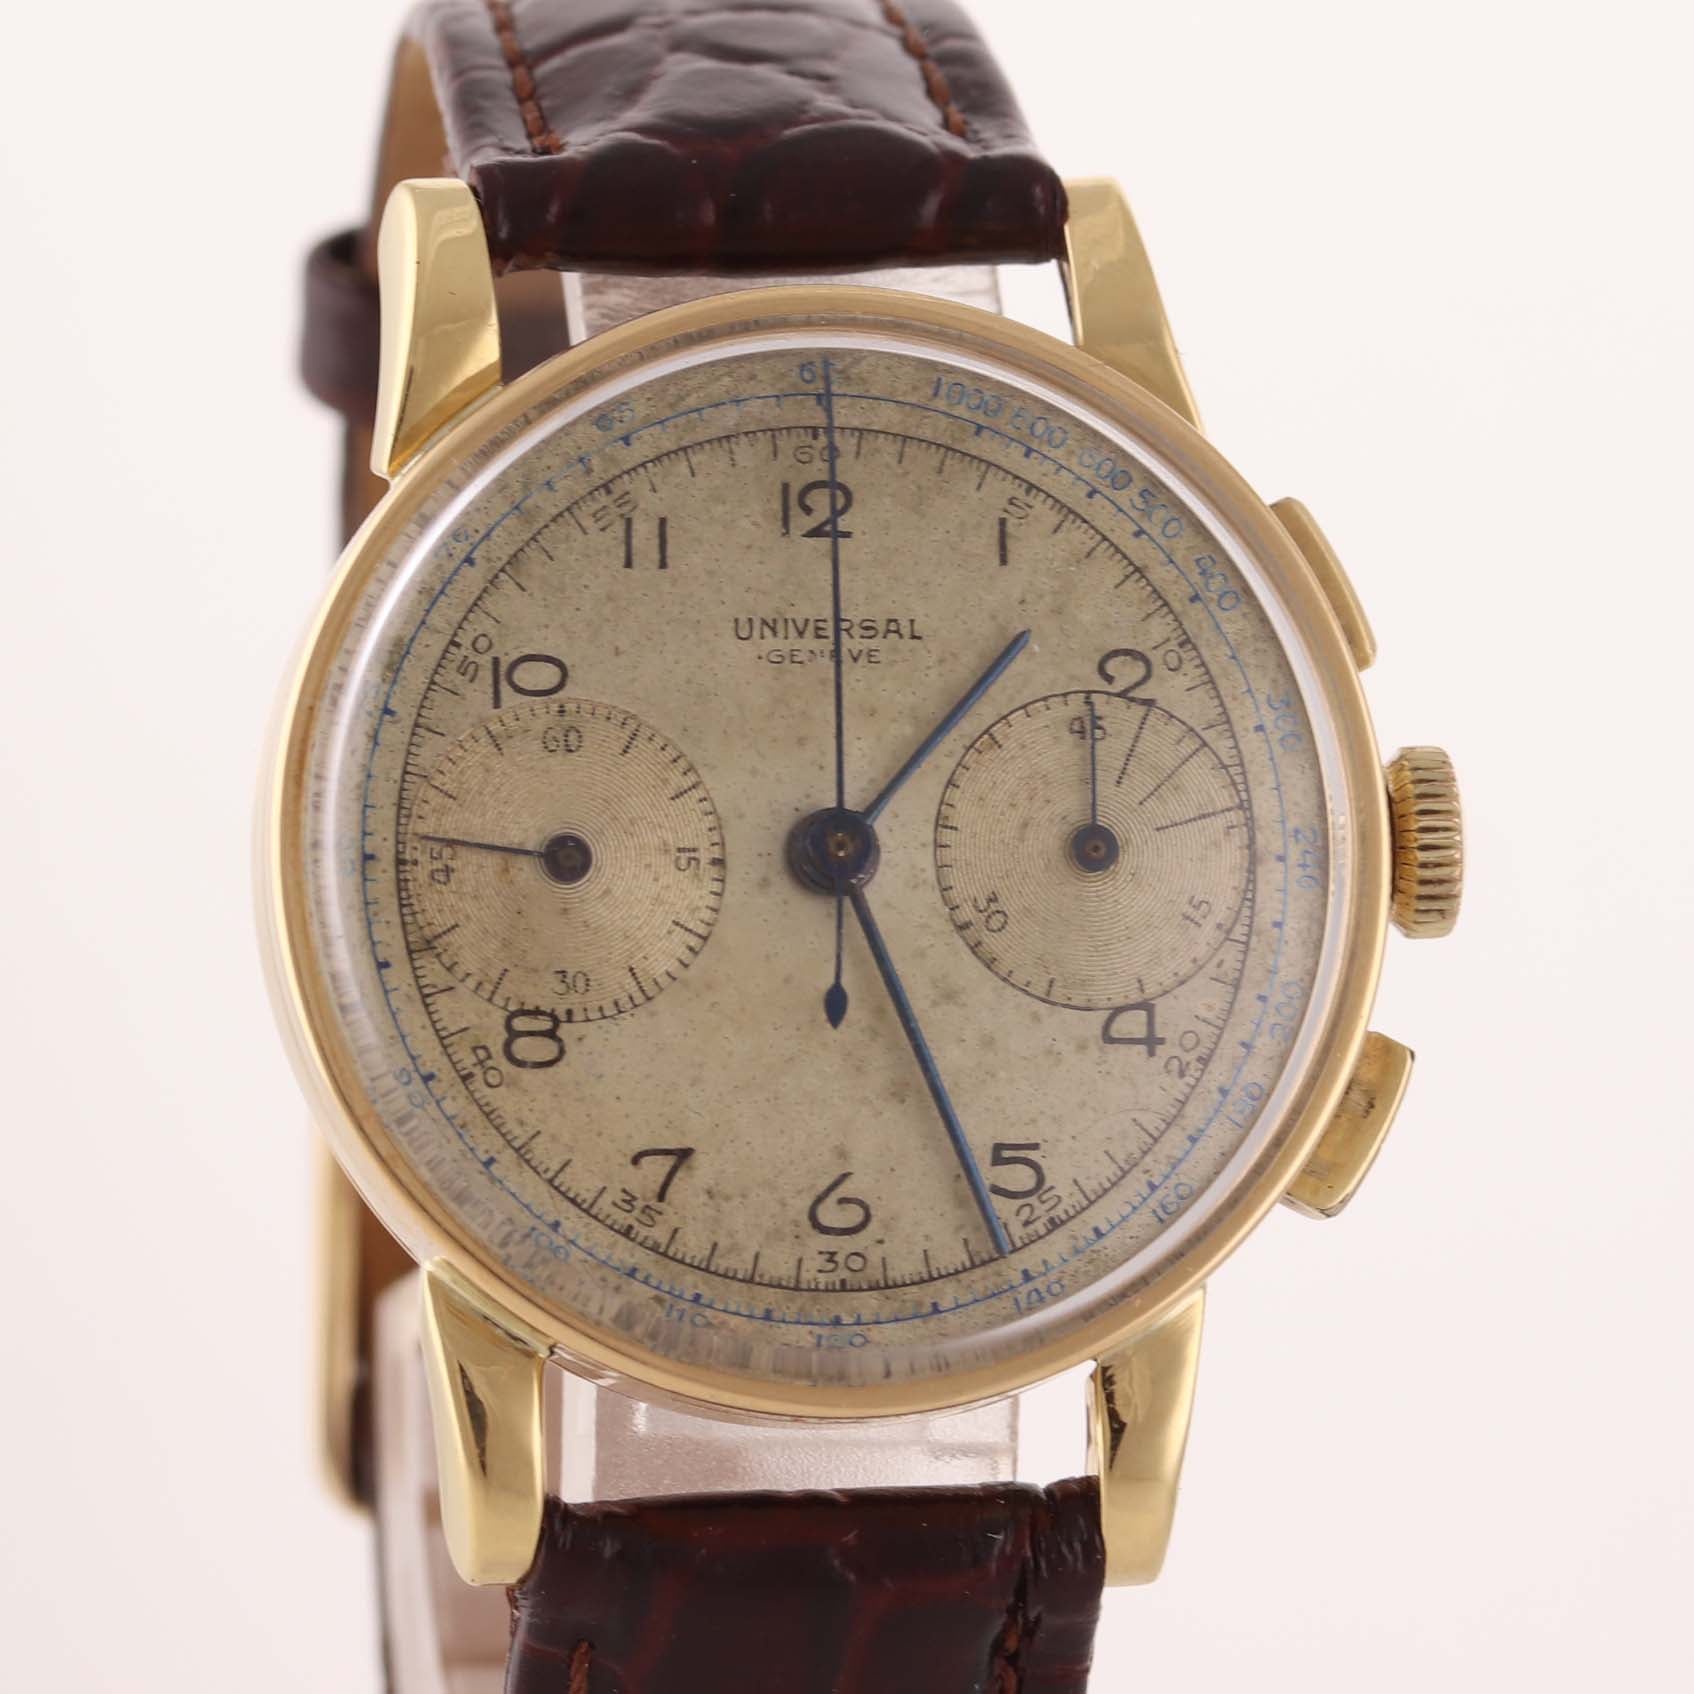 VTG Universal Geneve Compur Solid 18k Yellow Gold 34mm Chronograph 12402 Watch